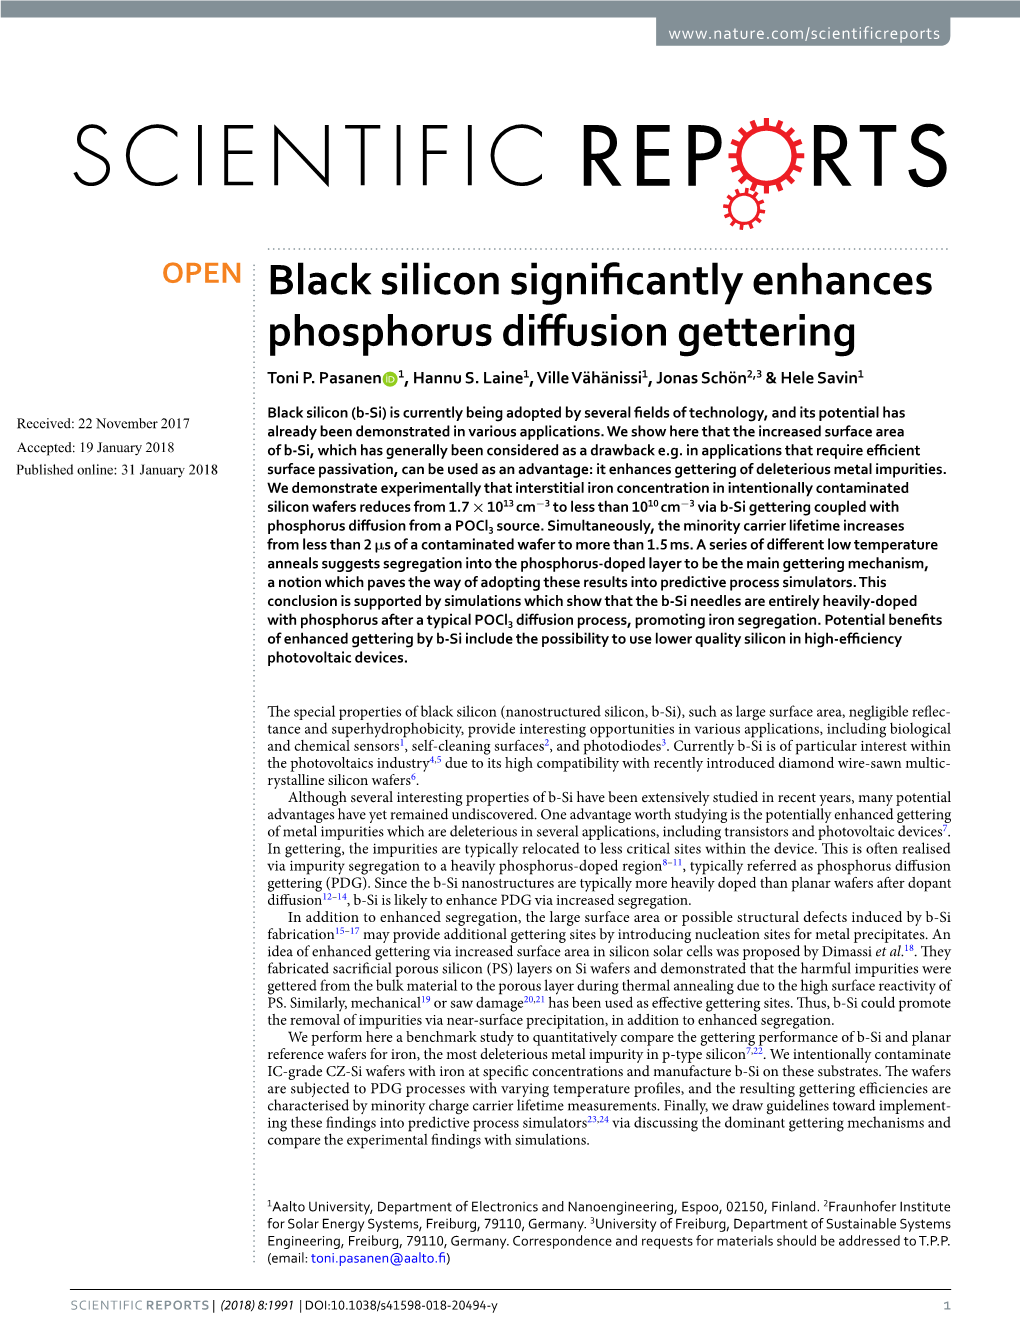 Black Silicon Significantly Enhances Phosphorus Diffusion Gettering